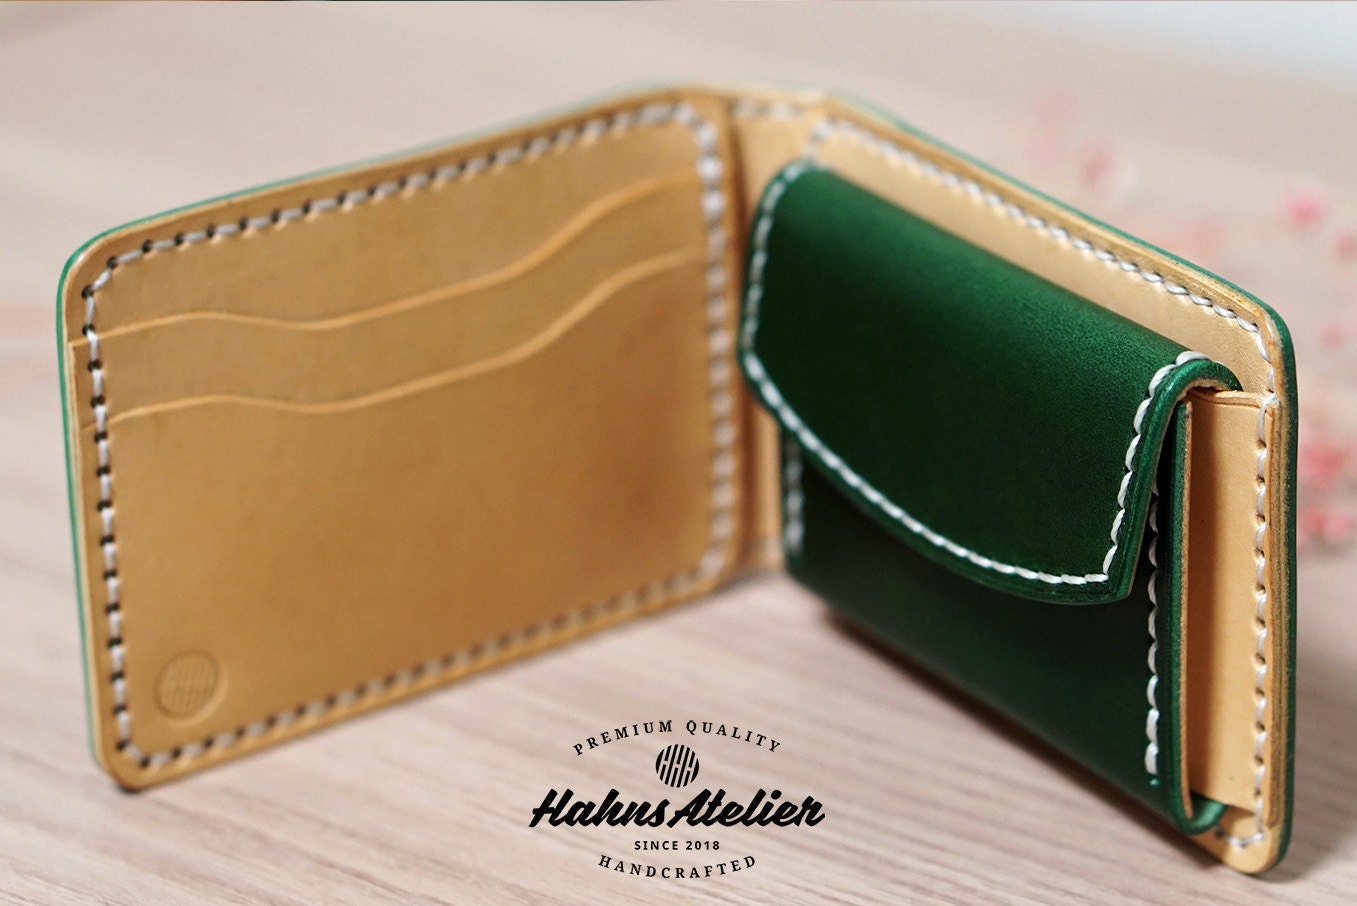 How to Make a Classic Leather Envelope Wallet (With Pattern!) - YouTube